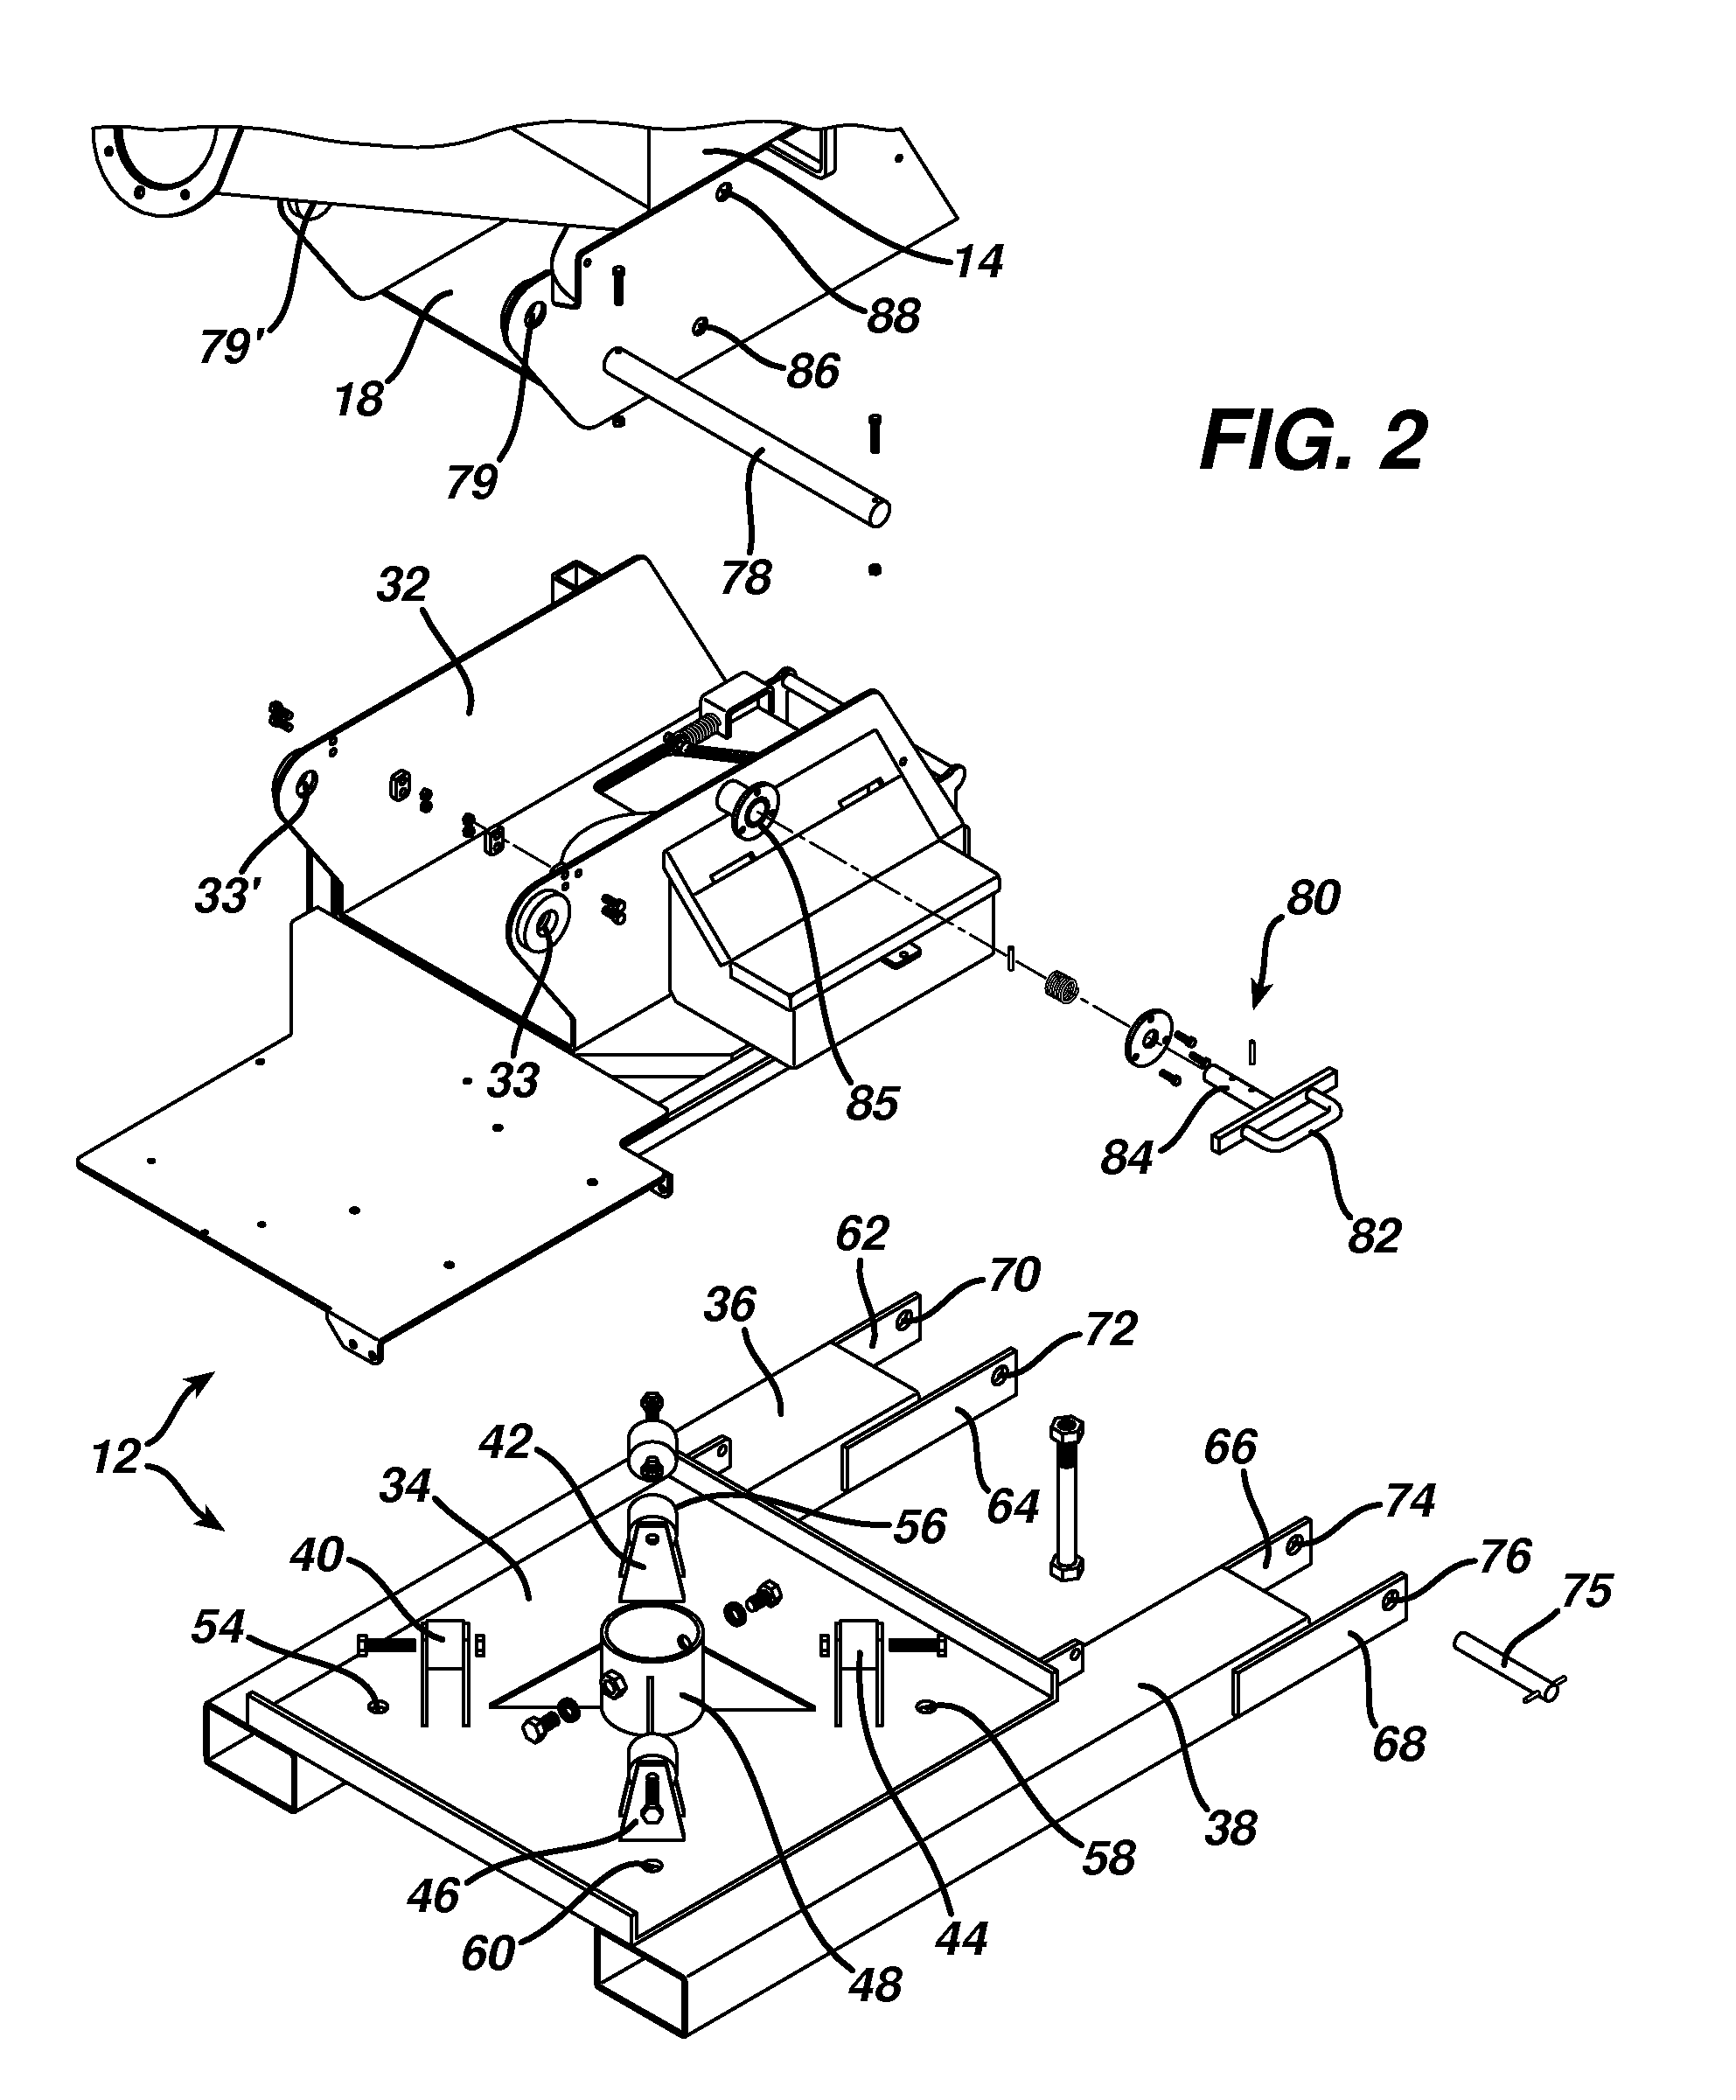 Wet cement dispensing apparatus with cleaning and access features